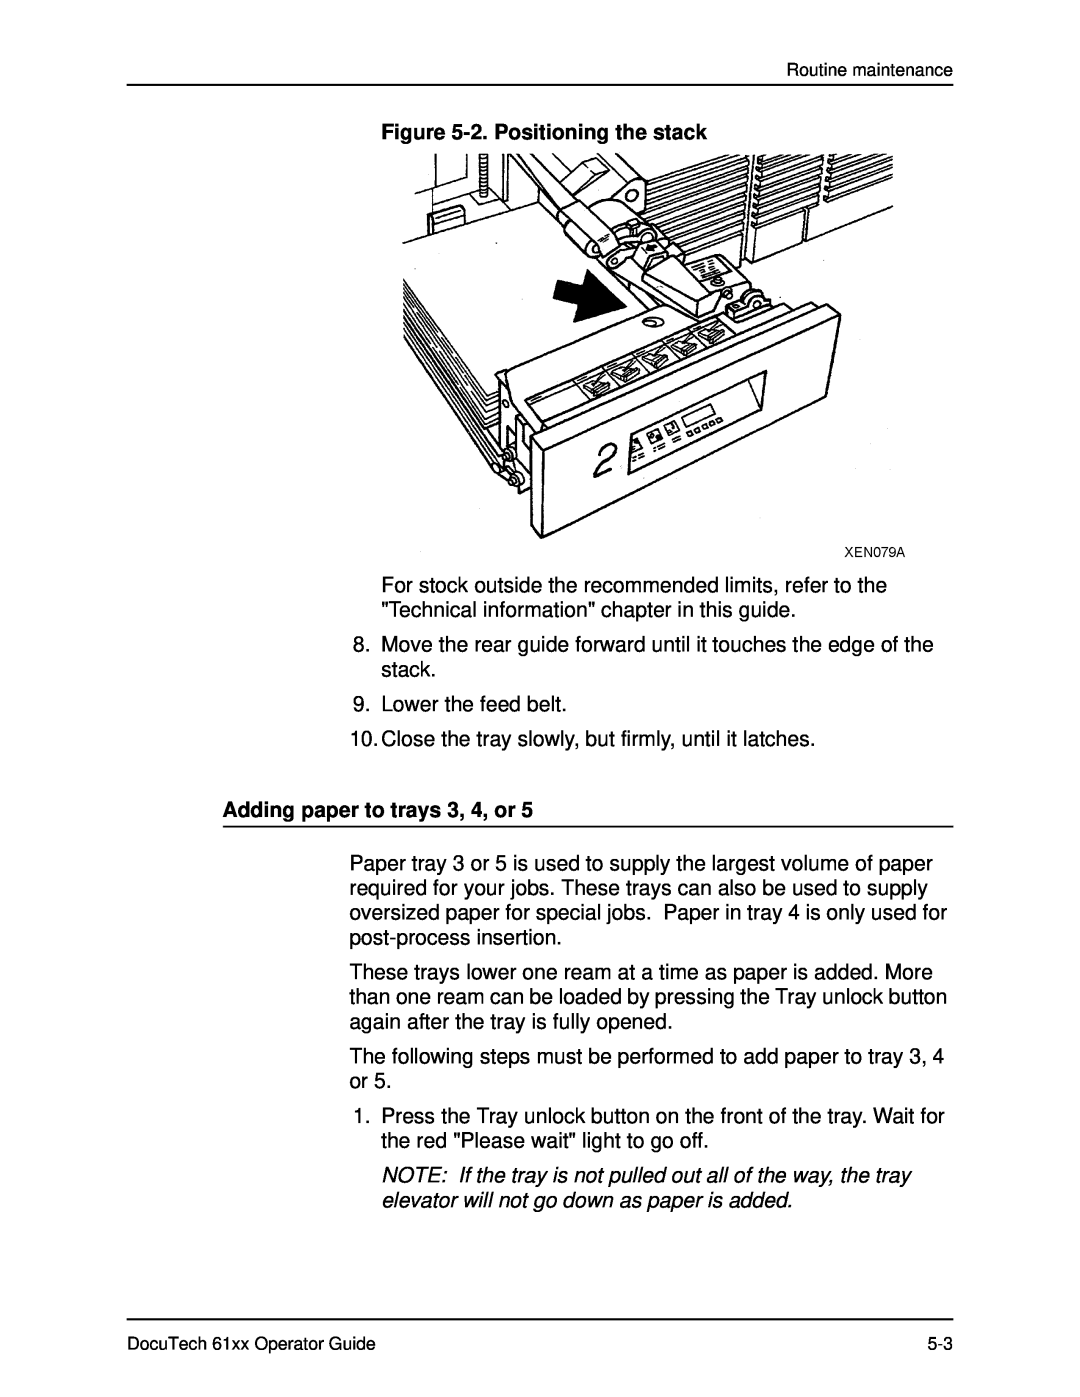 Xerox 61xx manual 2. Positioning the stack, Adding paper to trays 3, 4, or 